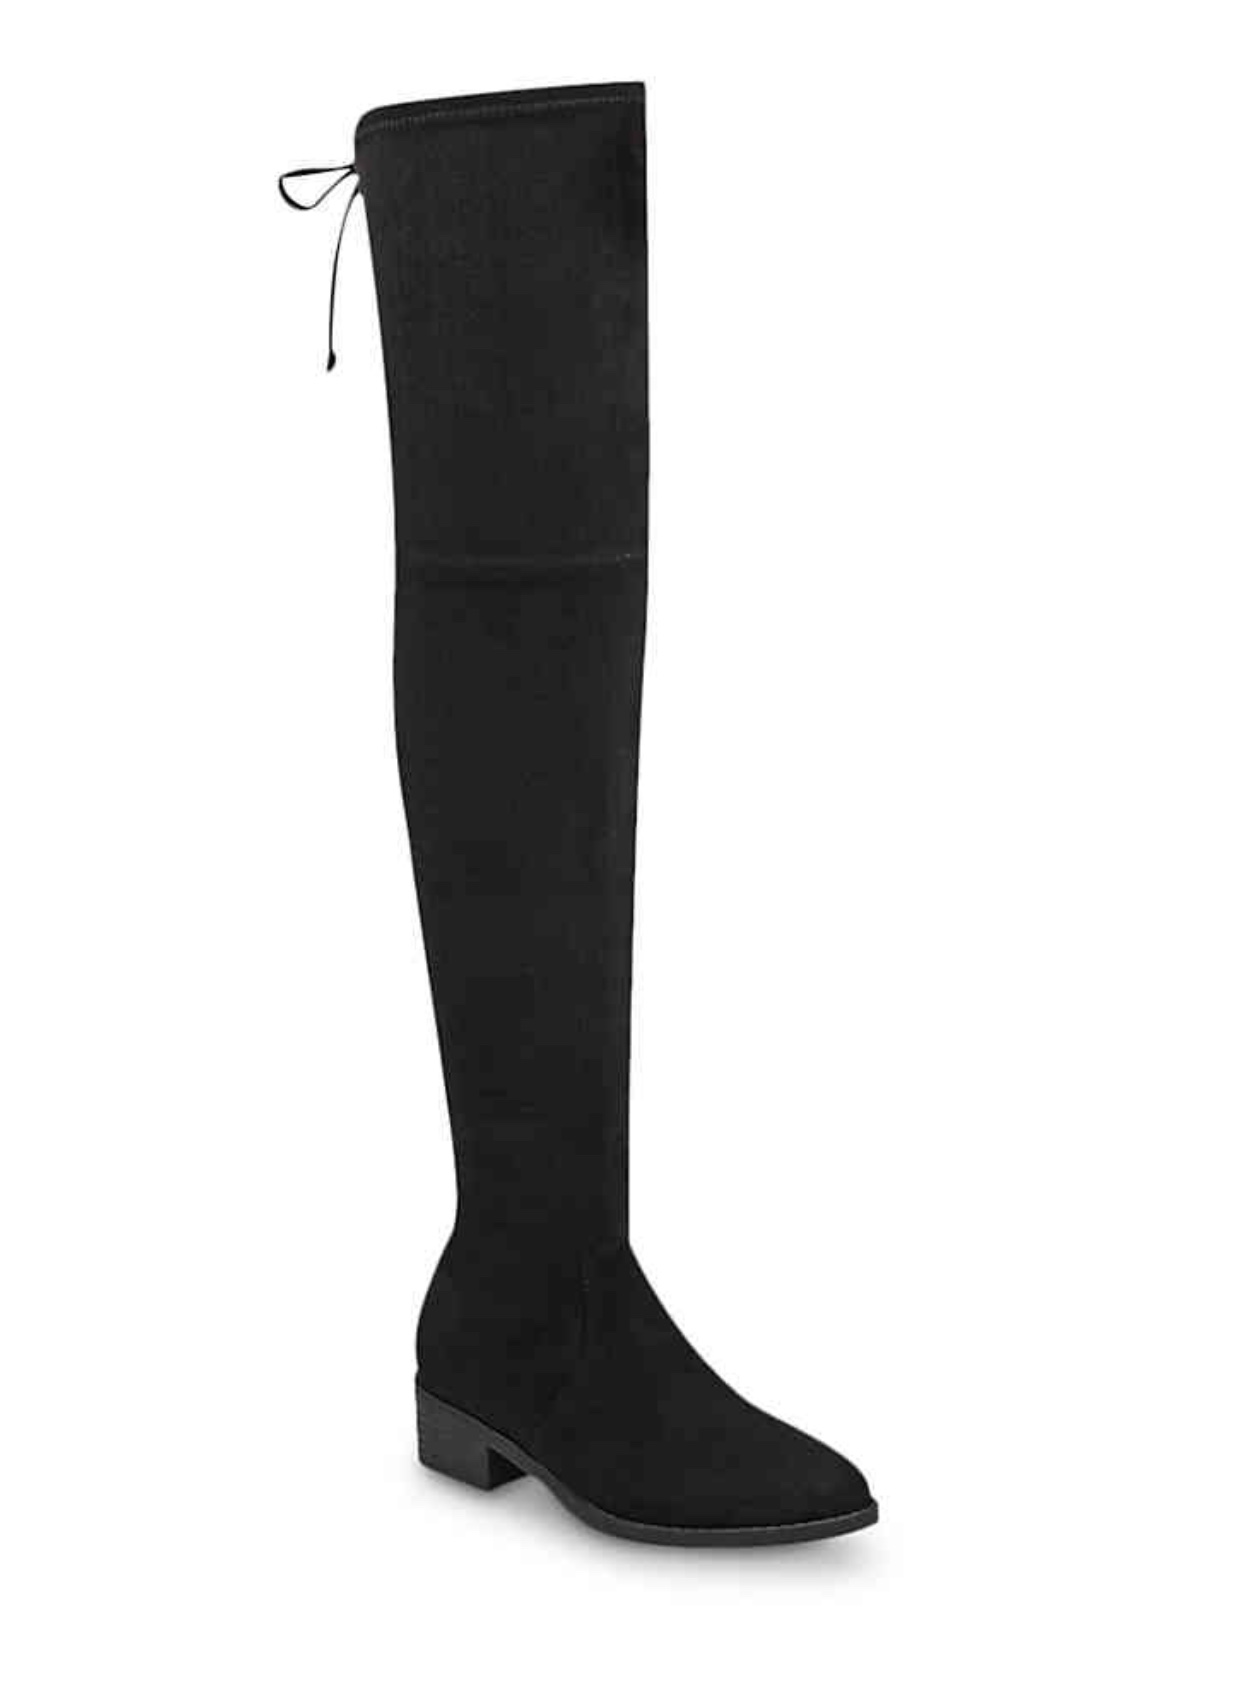 Why I Didn't Buy Stuart Weitzman Boots - A Midlife Style, Home 